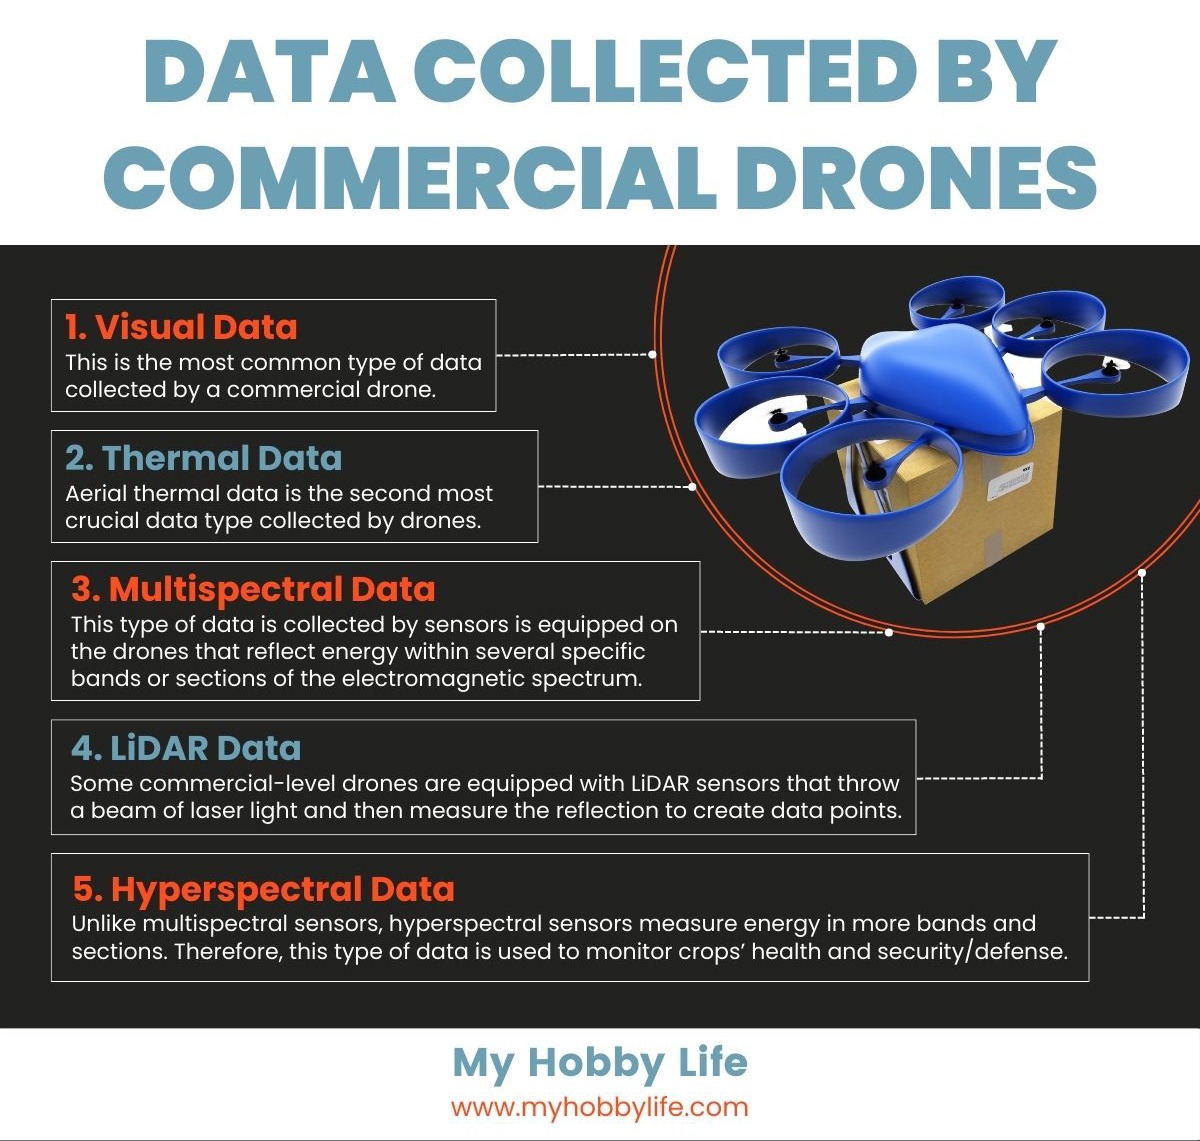 Data Collected by Commercial Drones